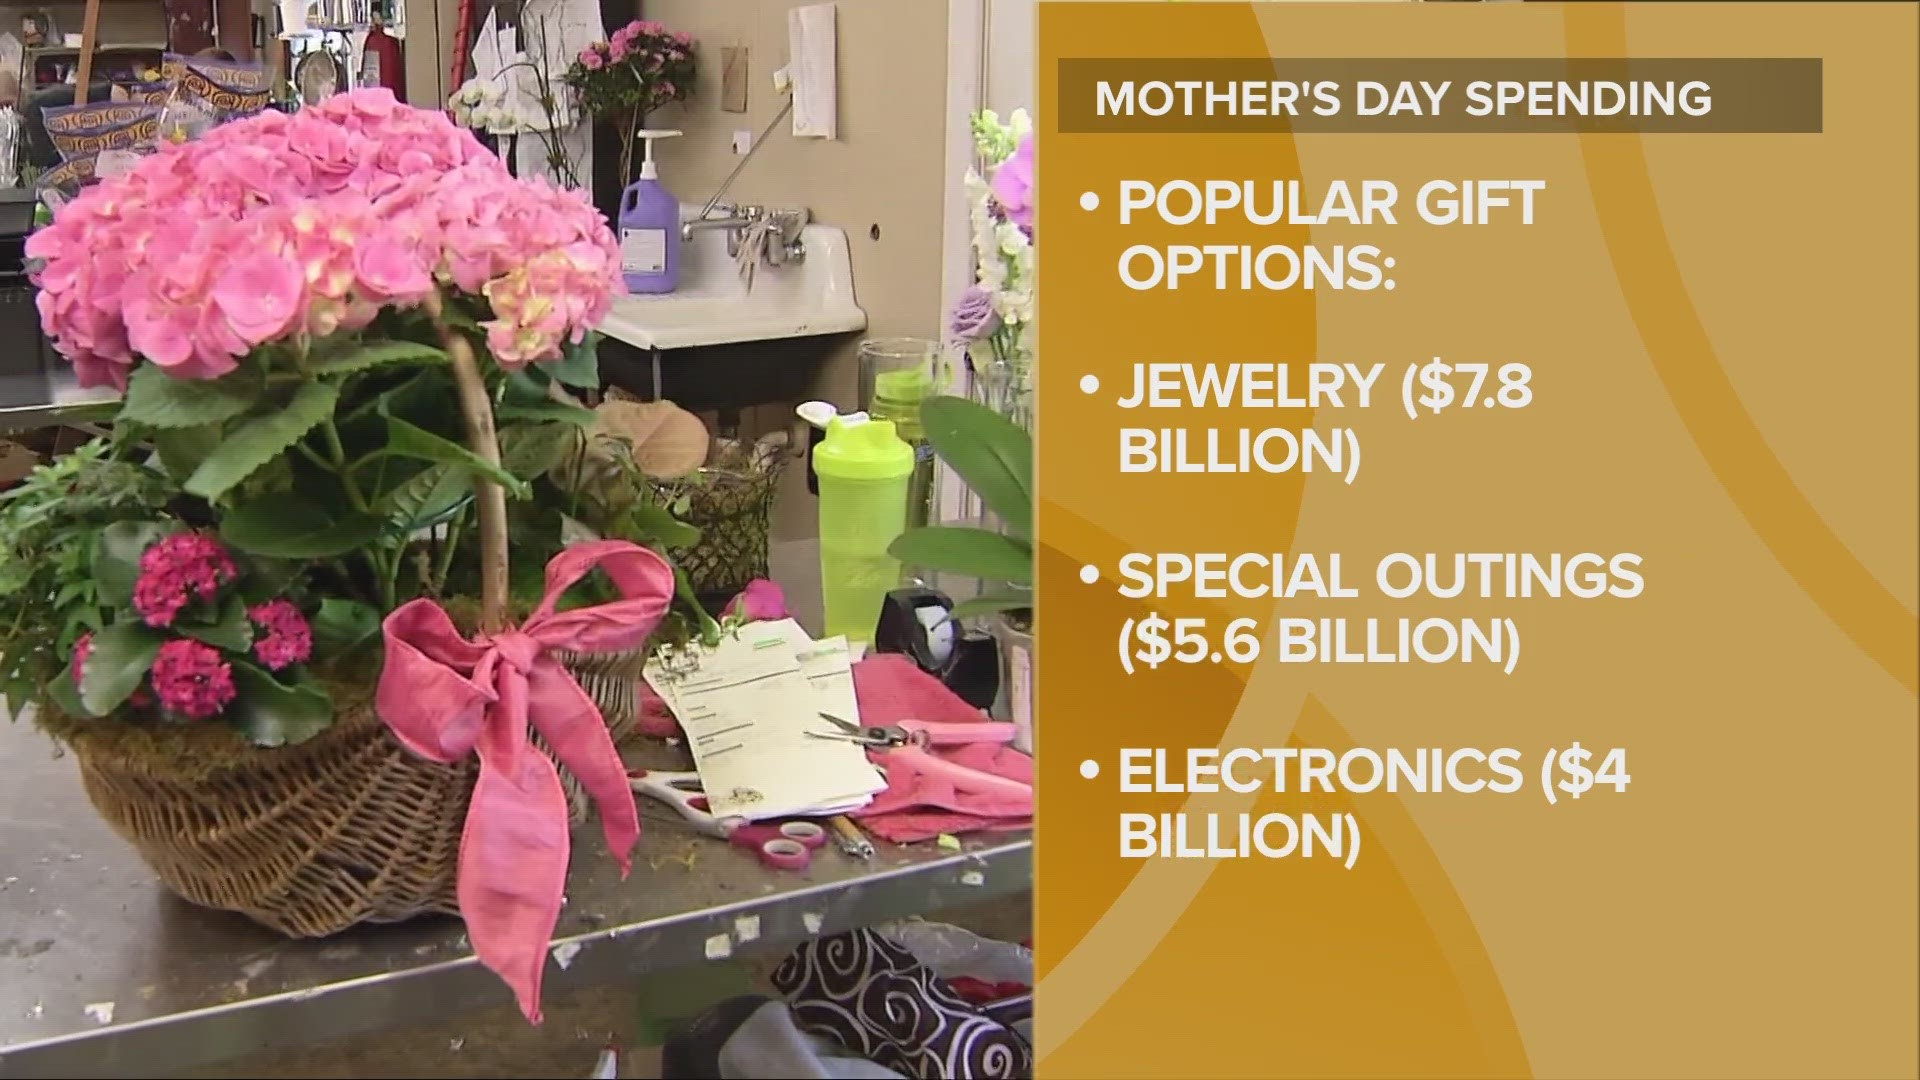 65 Mother's Day Gifts for Hard to Buy Mom: Jewelry, Beauty Products And  More - Parade